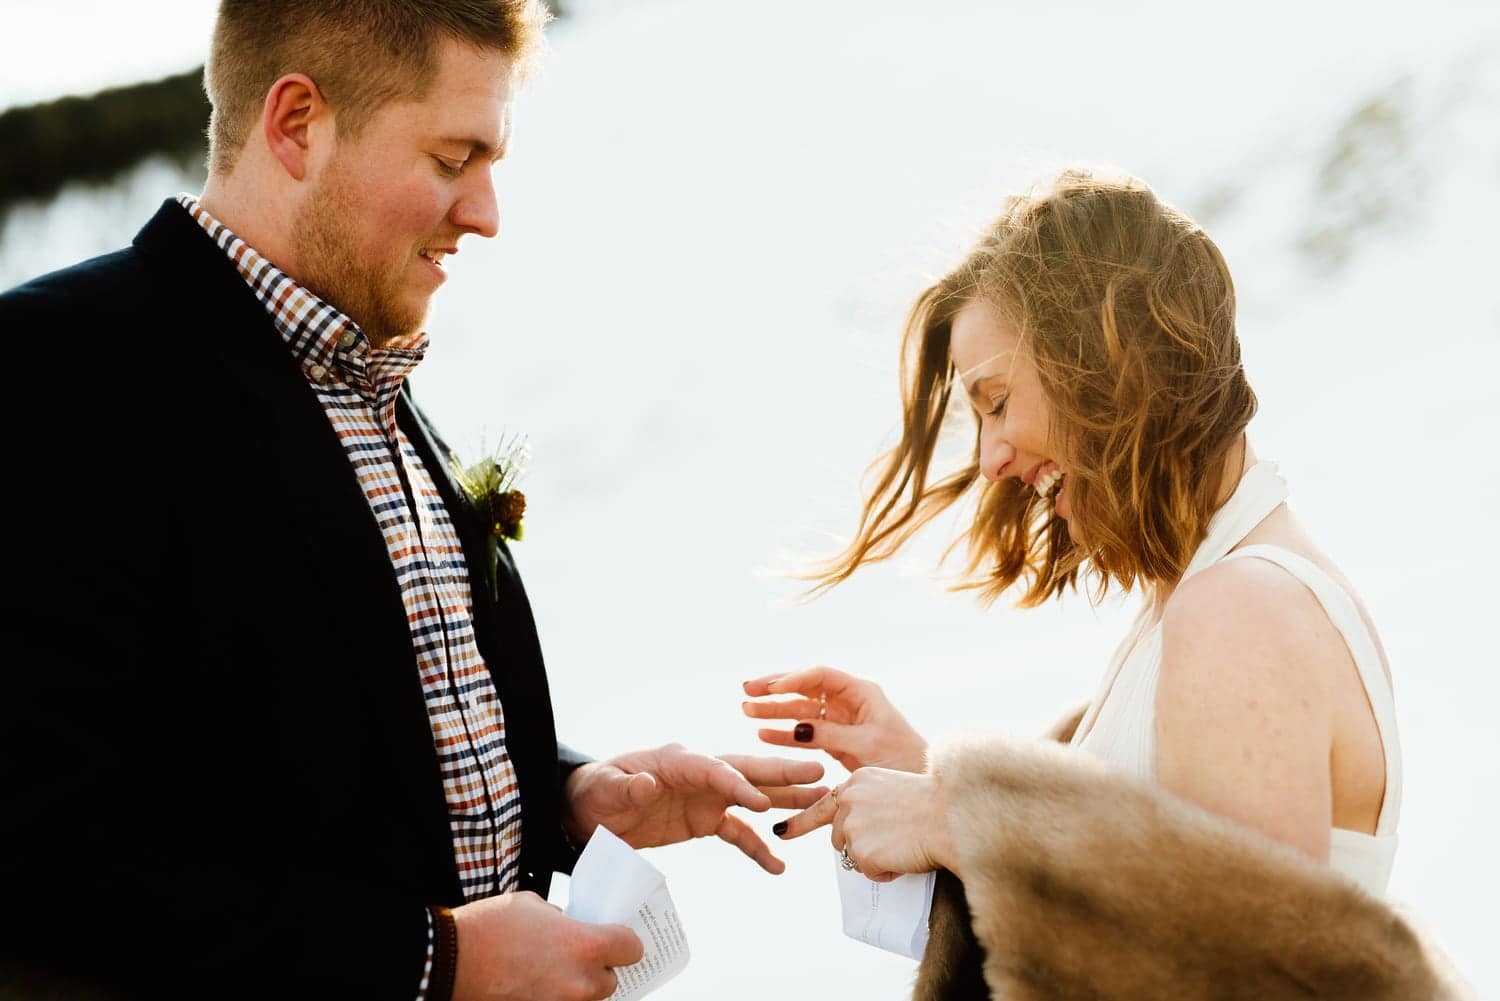 Bride places ring on grooms finger, while smiling, during intimate elopement ceremony. 